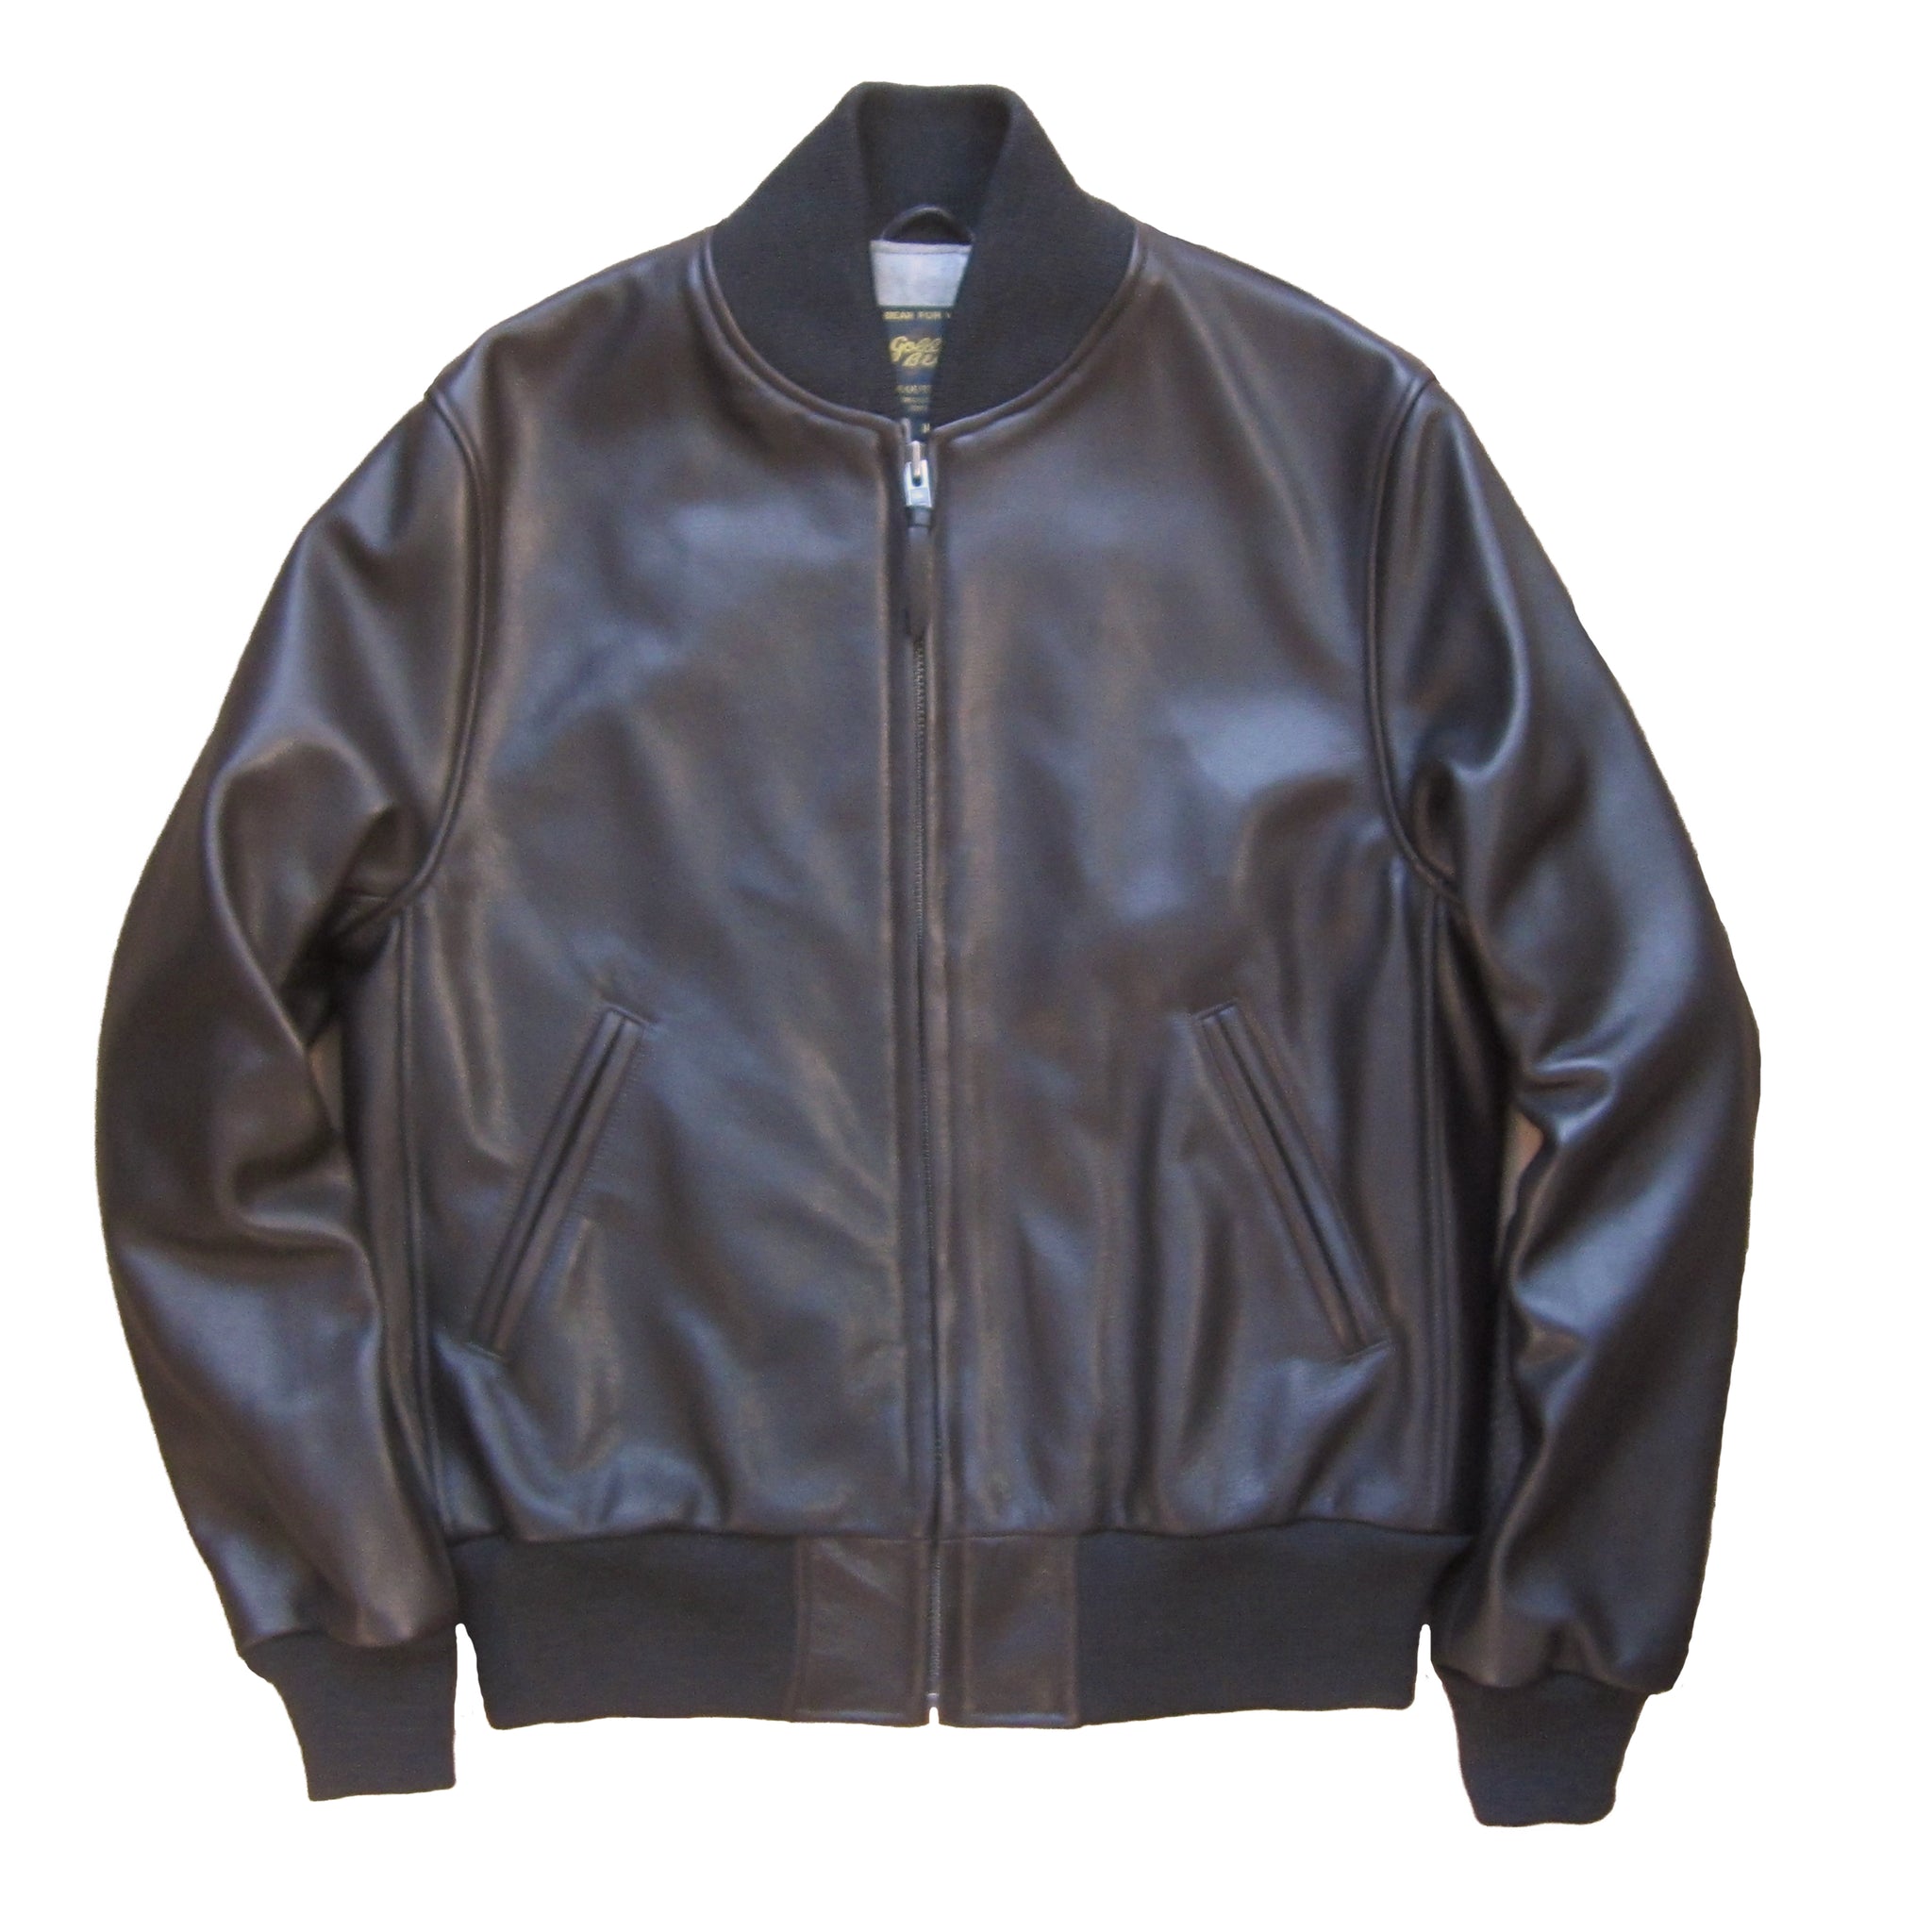 The Ashbury - Dark Brown Zip Front Naked Leather Baseball CONTEMPORARY FIT - Golden Bear Sportswear 